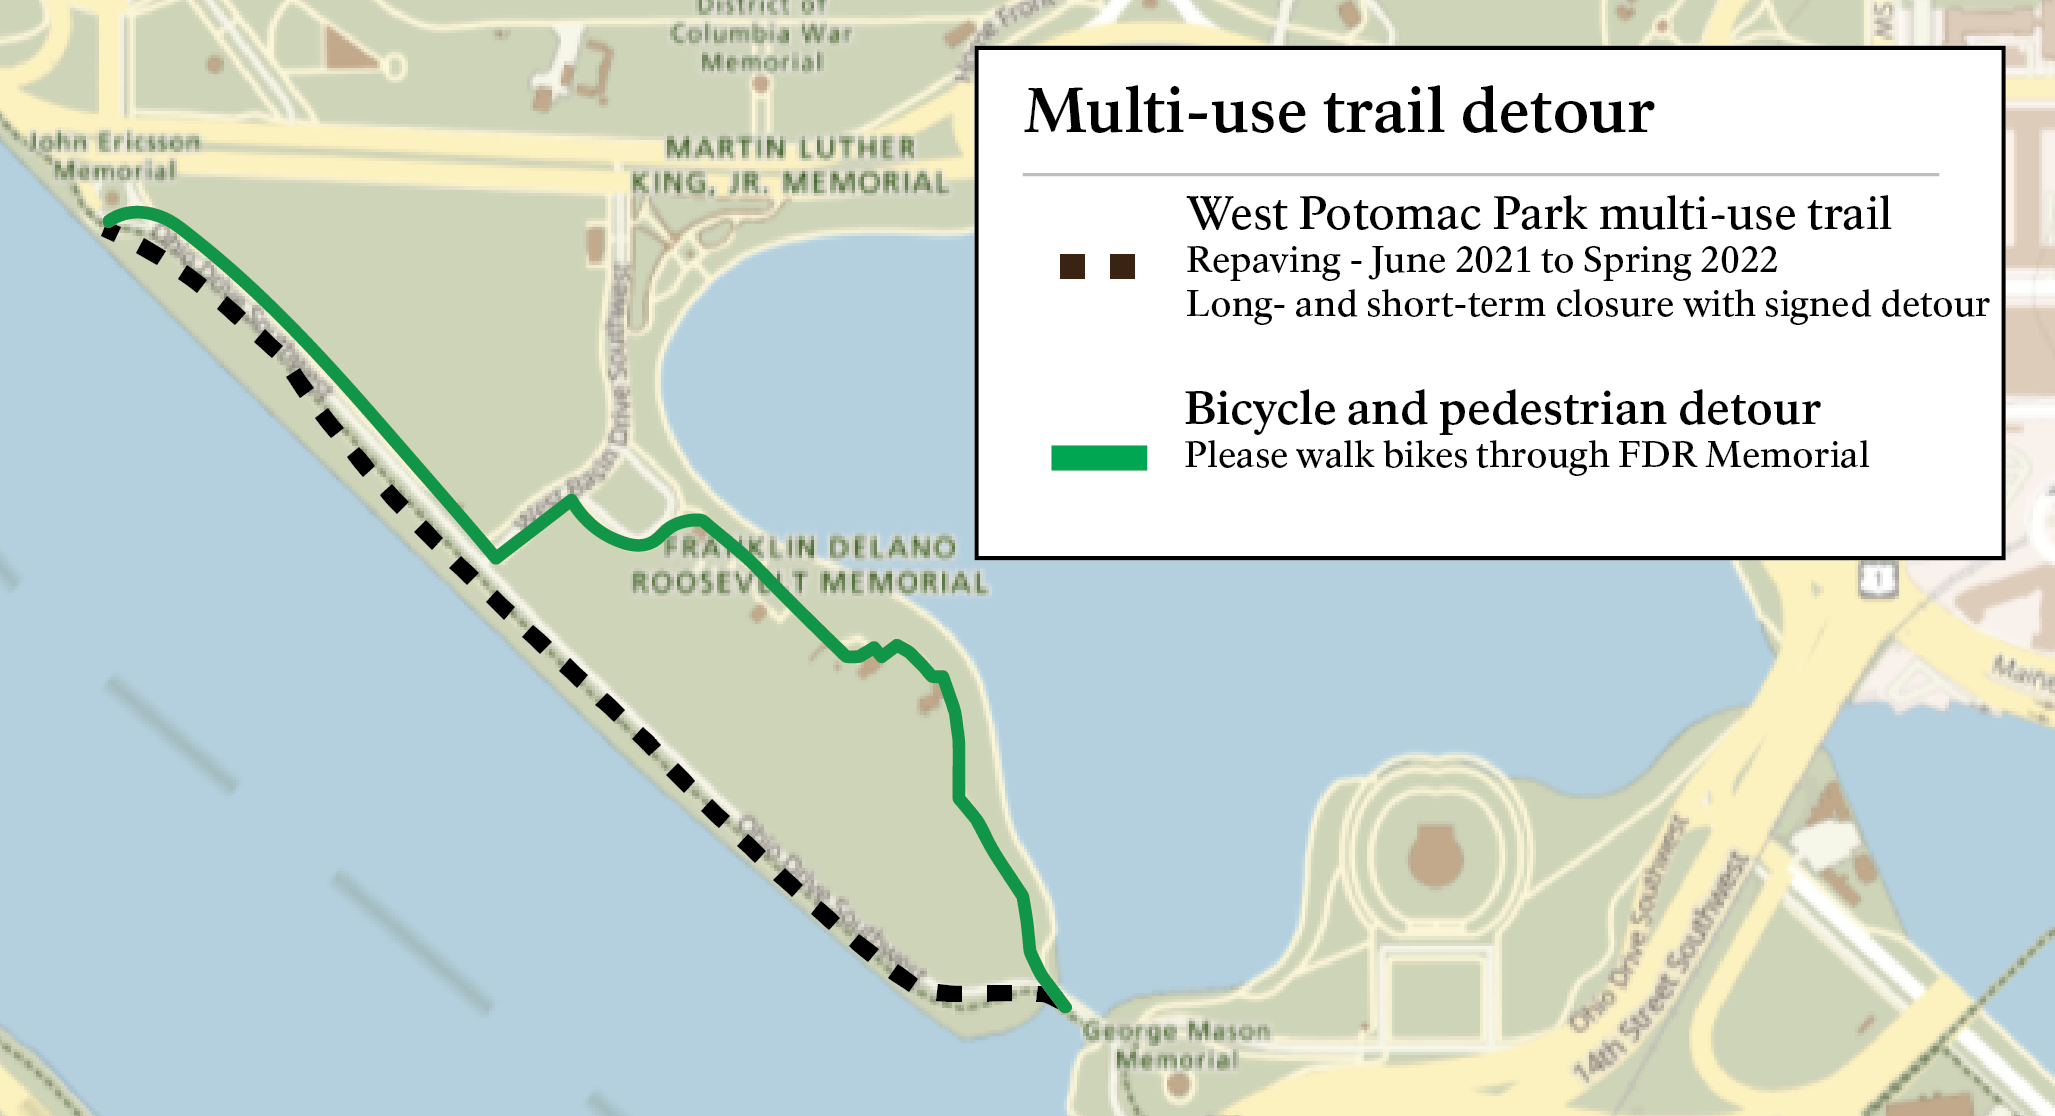 Map of detour for pedestrians and bicyclists during multi-use trail work next to Ohio Drive between Independence Avenue SW and Inlet Bridge (near FDR Memorial in West Potomac Park).